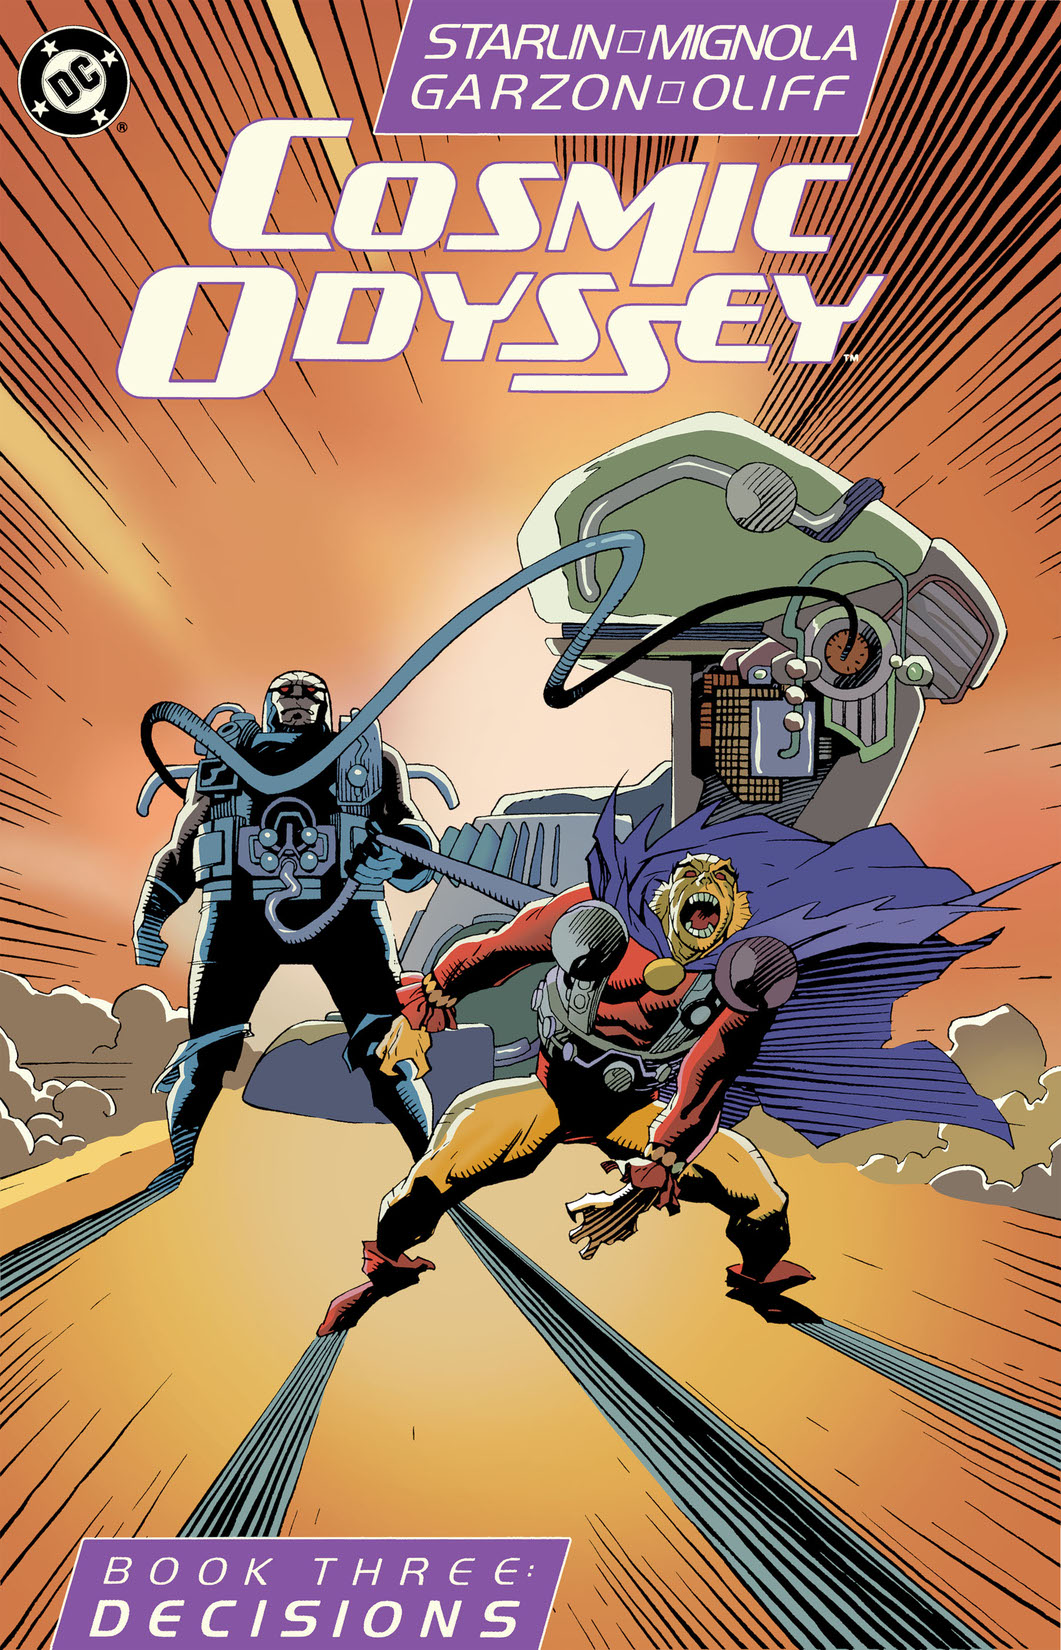 Cosmic Odyssey #3 preview images